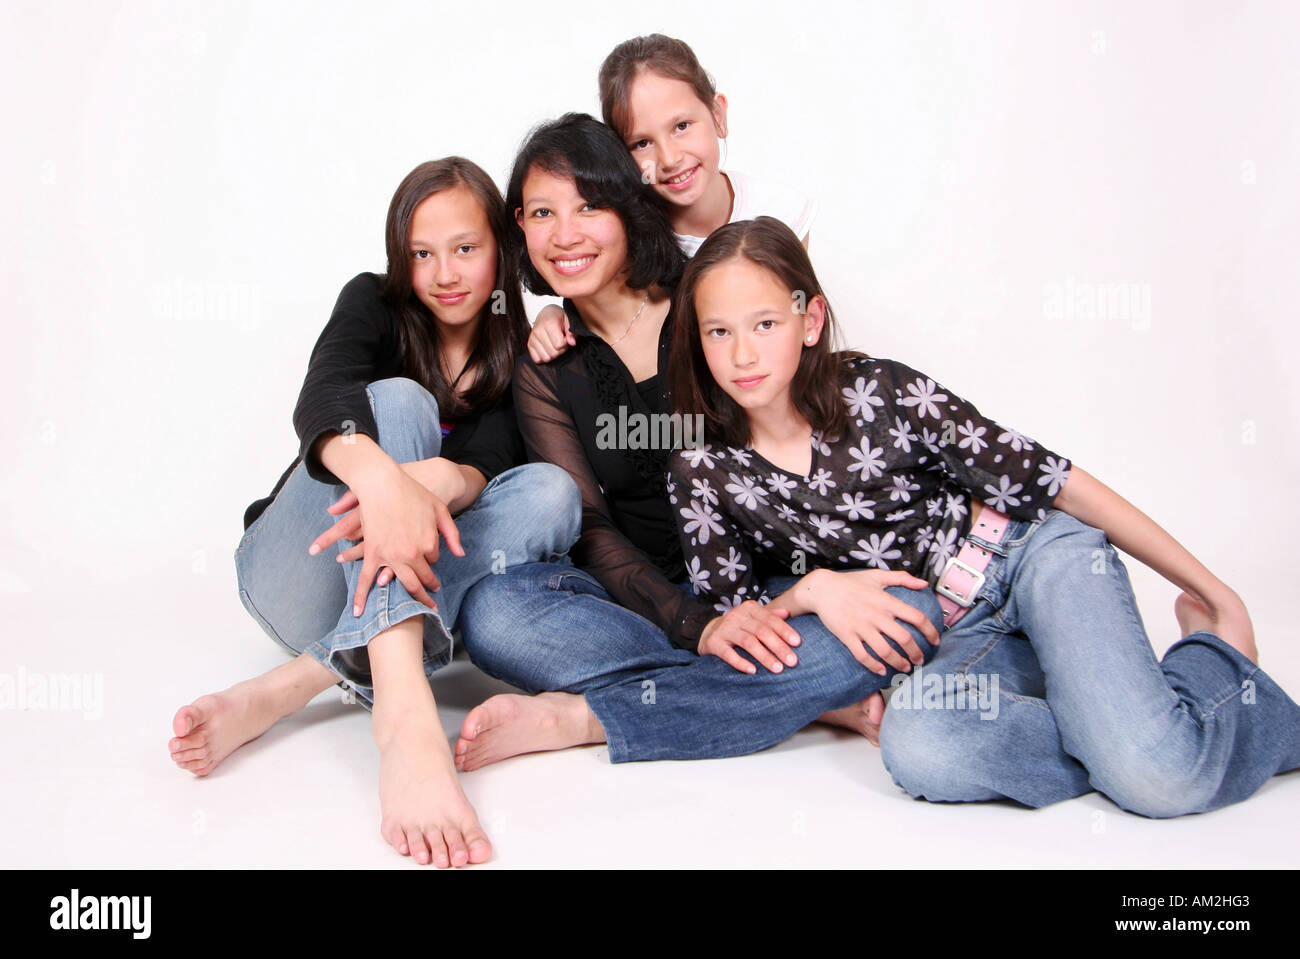 family portrait mother with three daughters Stock Photo